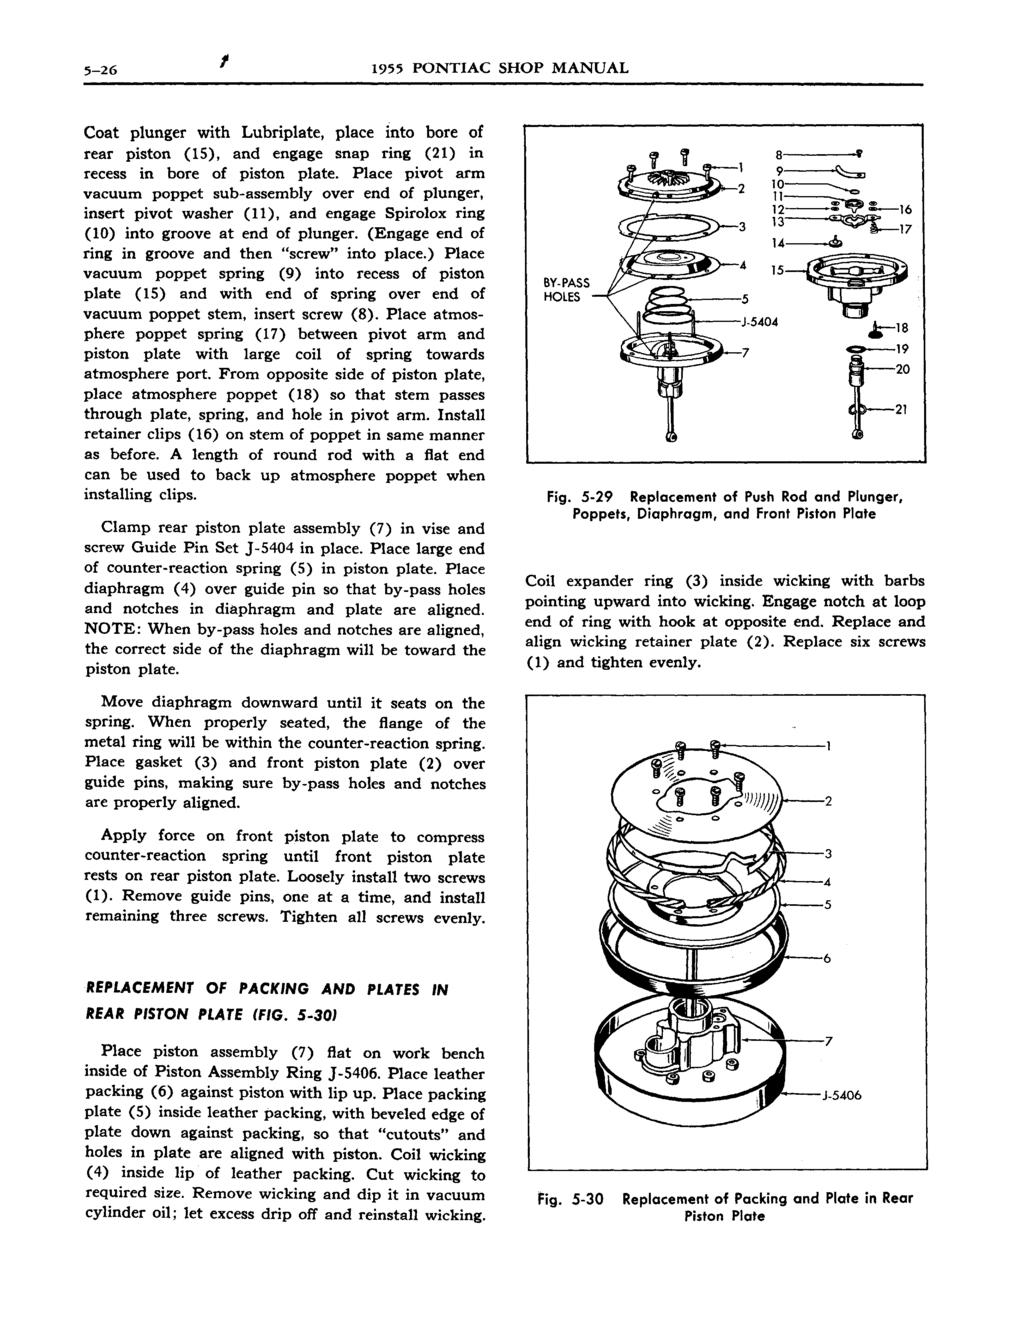 5-26 1 1955 PONTIAC SHOP MANUAL Coat plunger with Lubriplate, place into bore of rear piston (15), and engage snap ring (21) in recess in bore of piston plate.